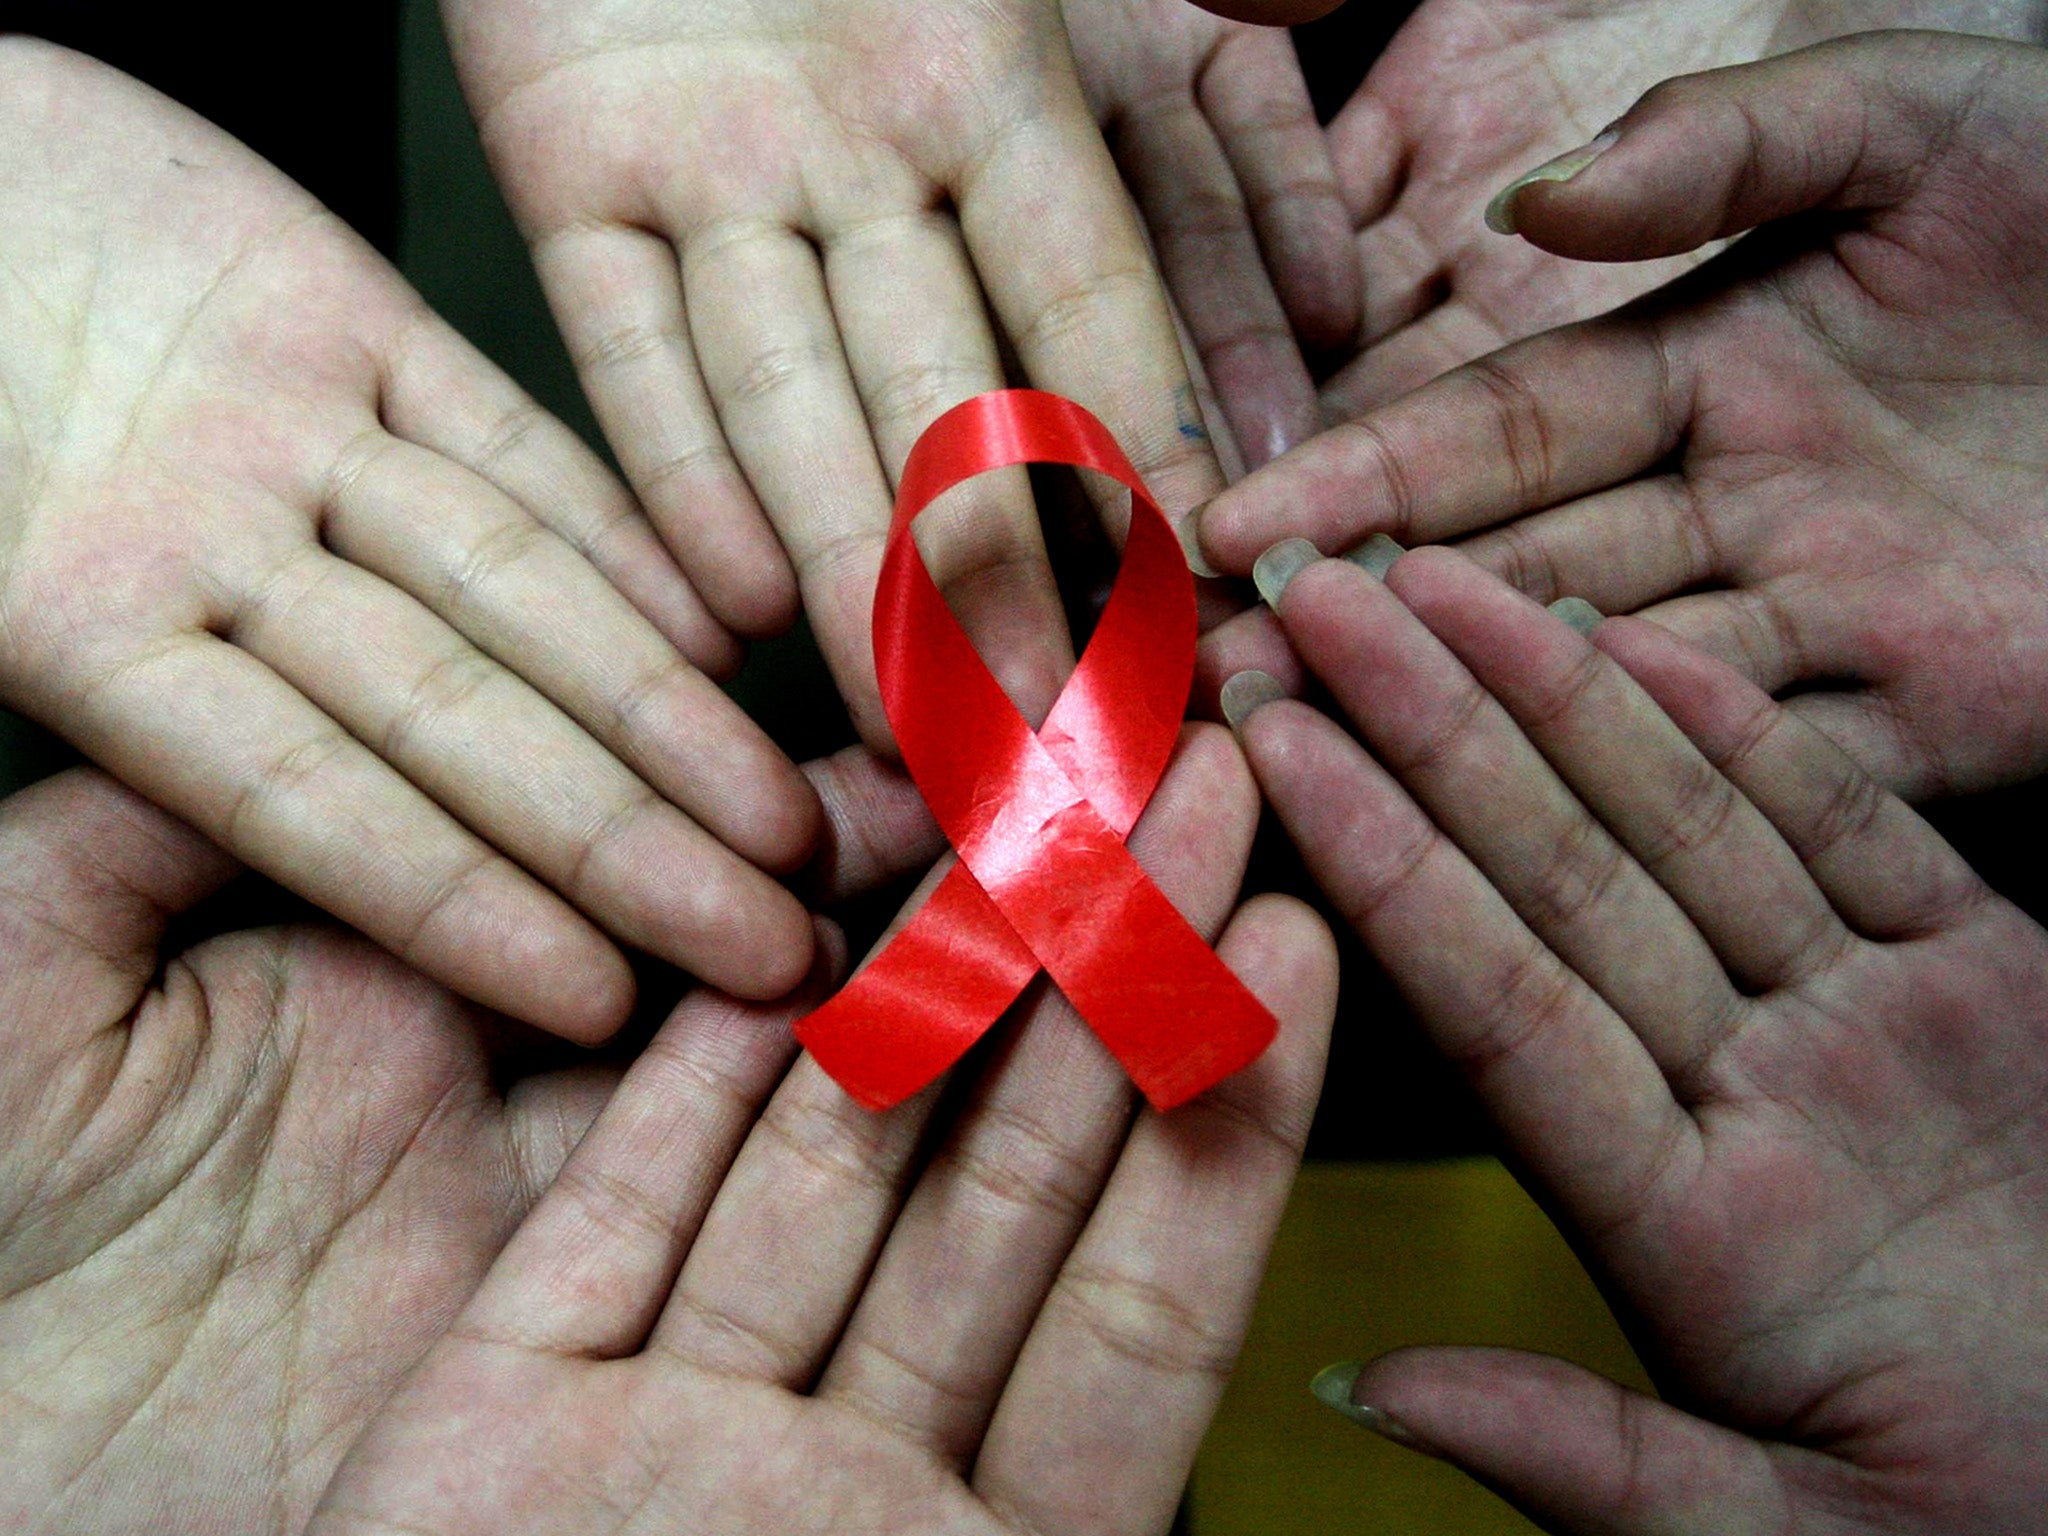 The American CDC have warned that while rare, female-to-female HIV contraction is possible